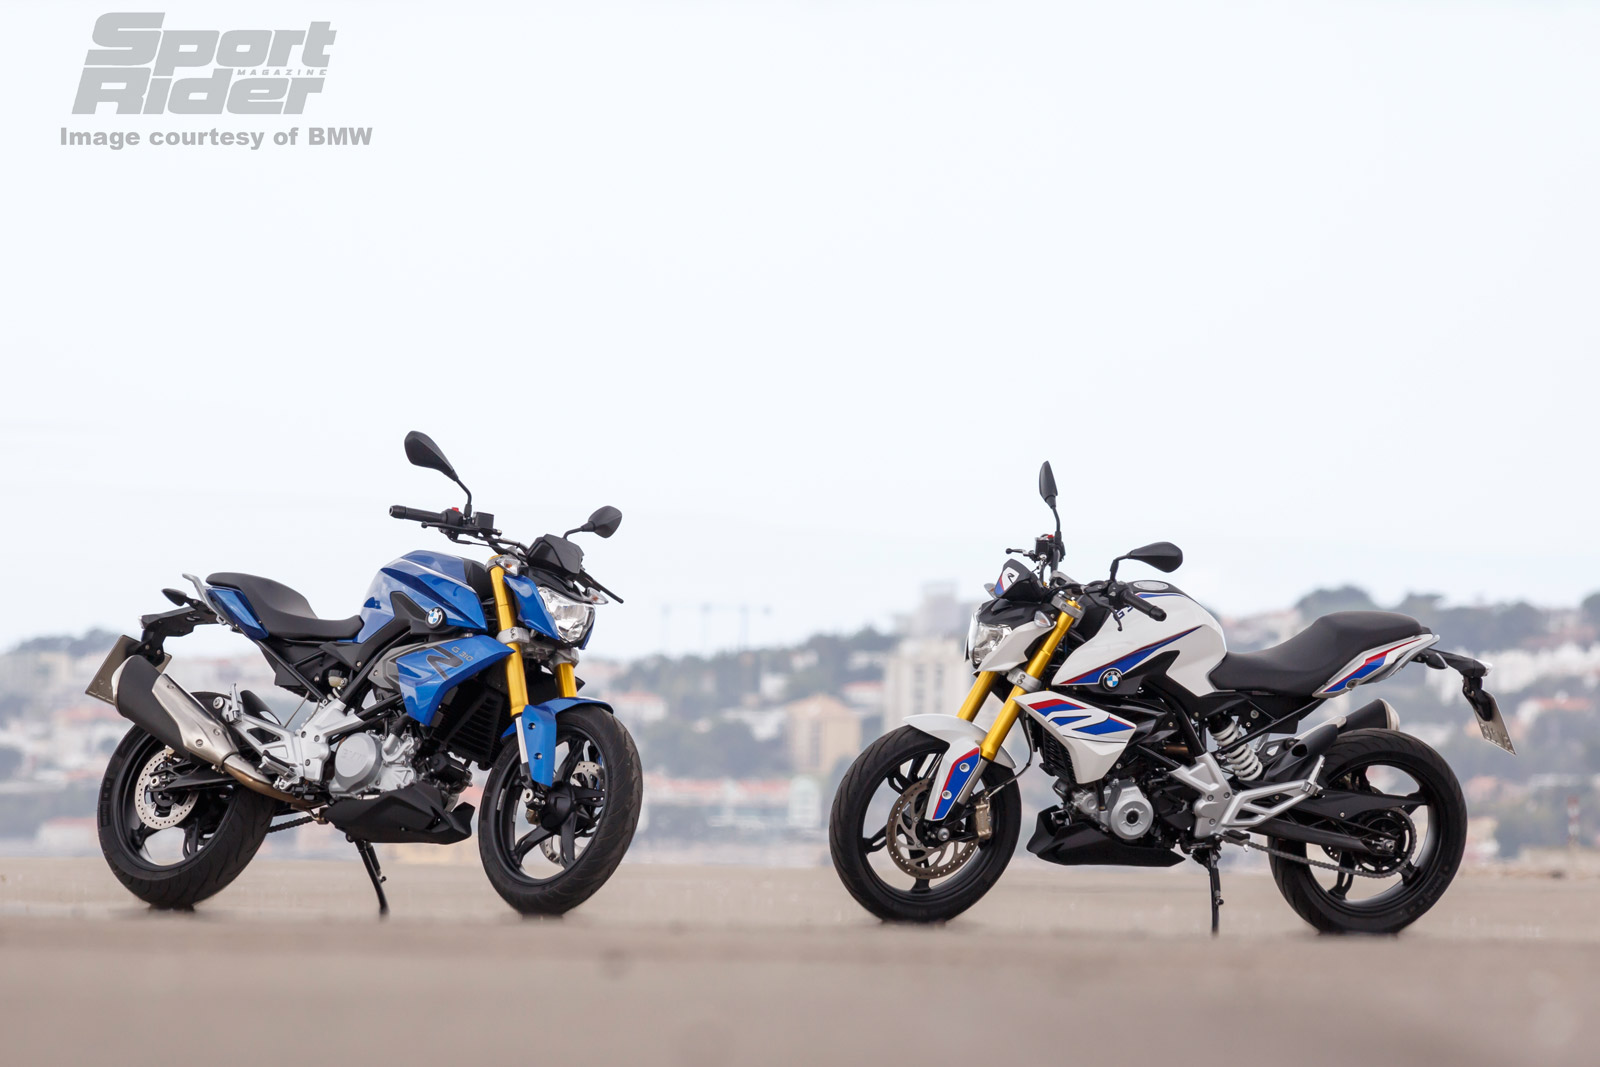 BMW G 310 R First Look | Cycle World